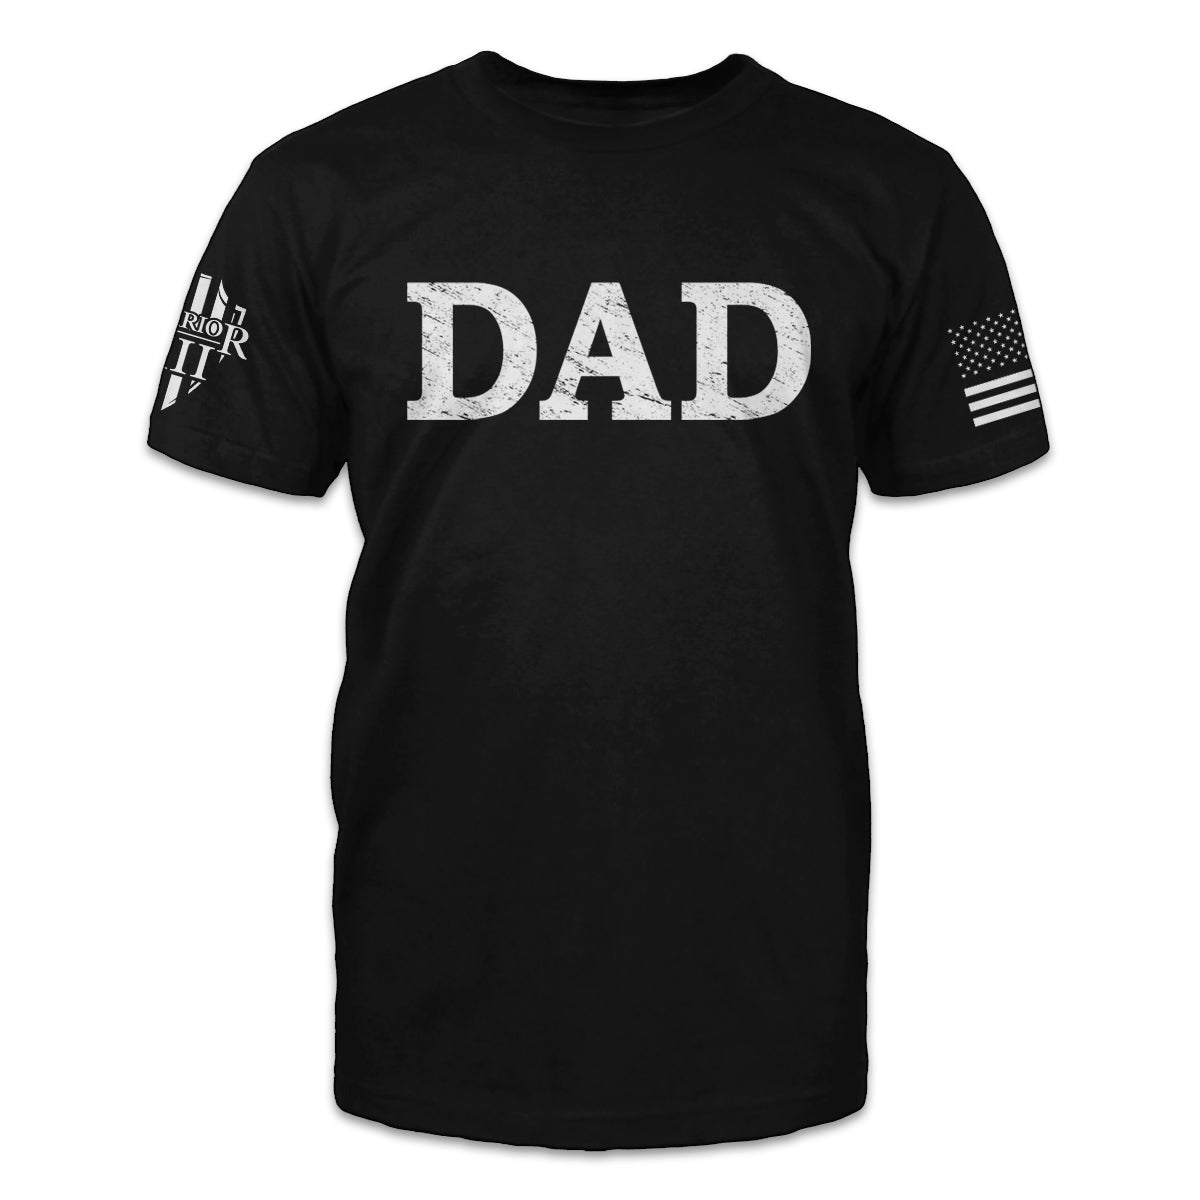 The front of a black t-shirt which features the word "DAD"